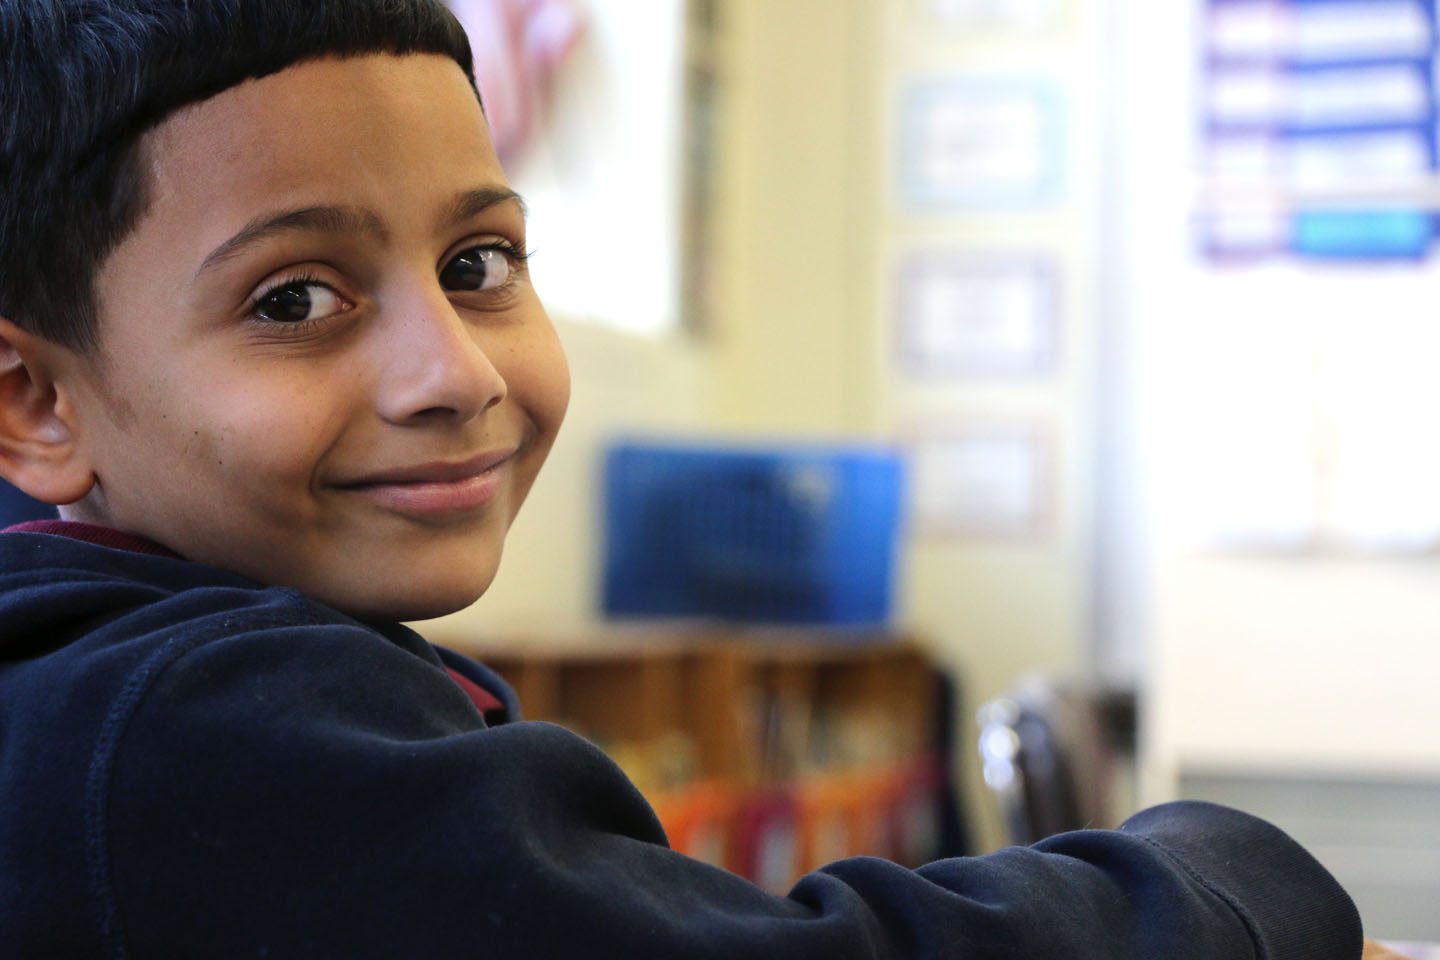 Middle school latino boy looking over shoulder smiling into camera